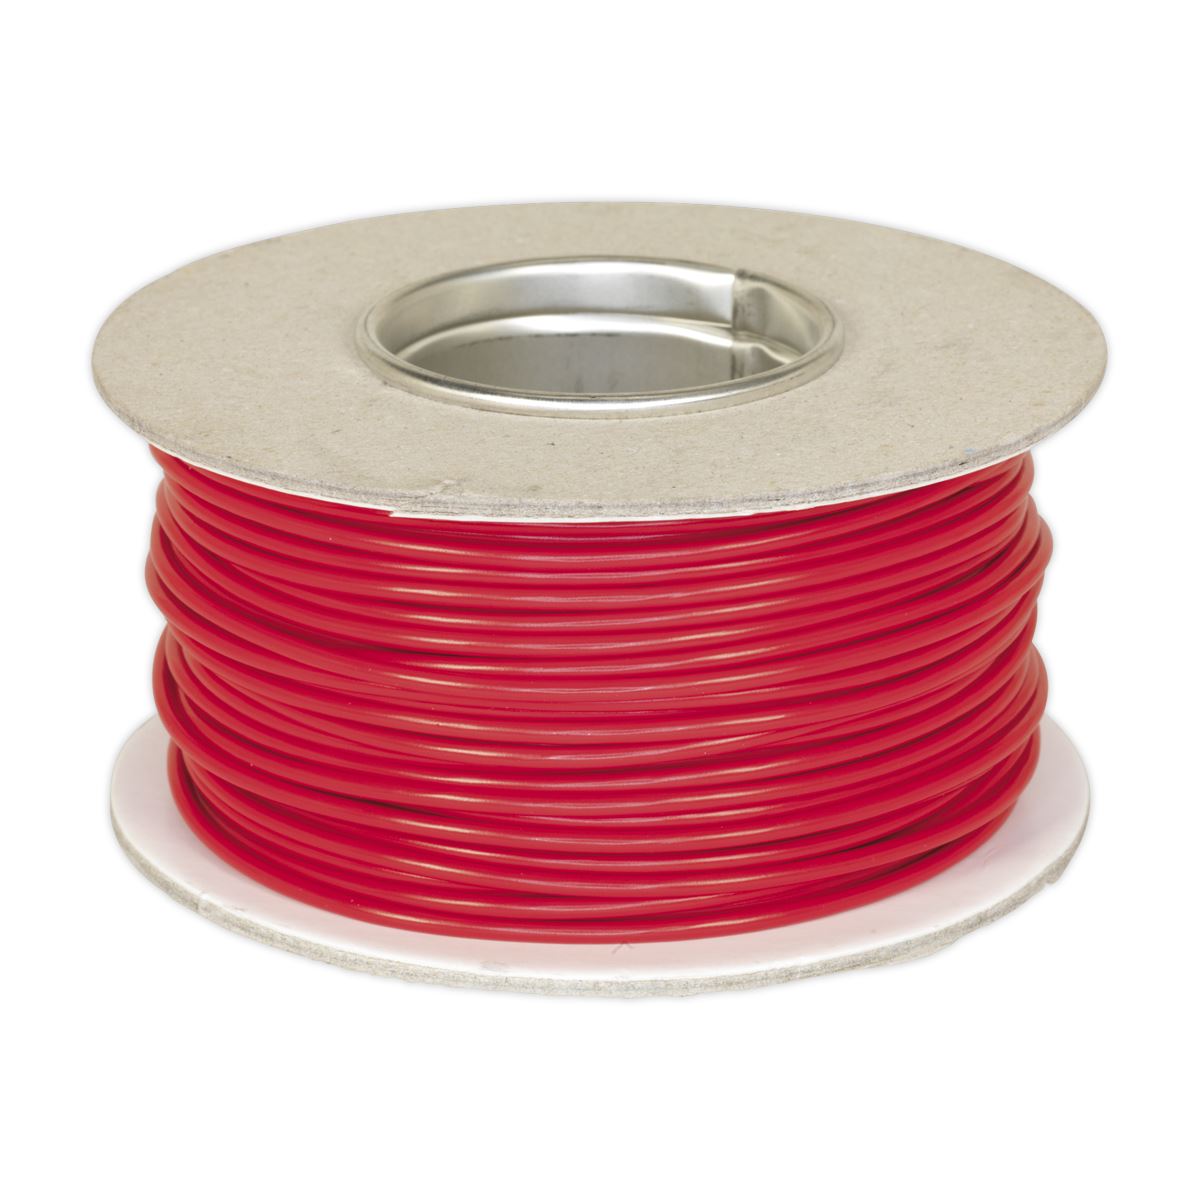 Sealey Automotive Cable Thin Wall Single 2mm² 28/0.30mm 50m Red